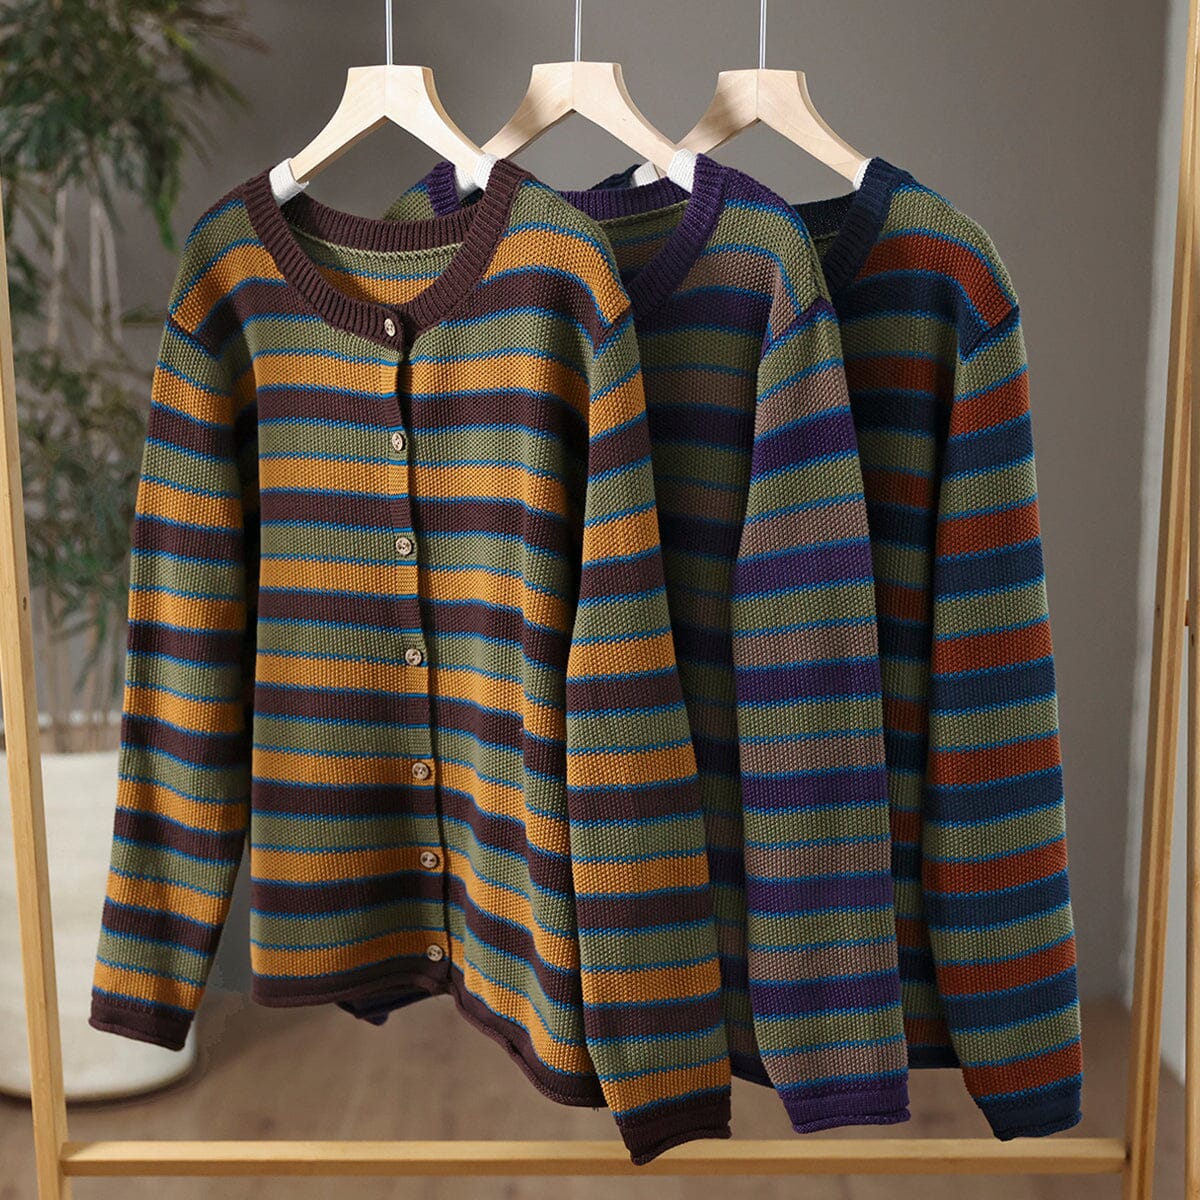 Women Spring Casual Stripe Cotton Knitted Sweater Feb 2023 New Arrival 